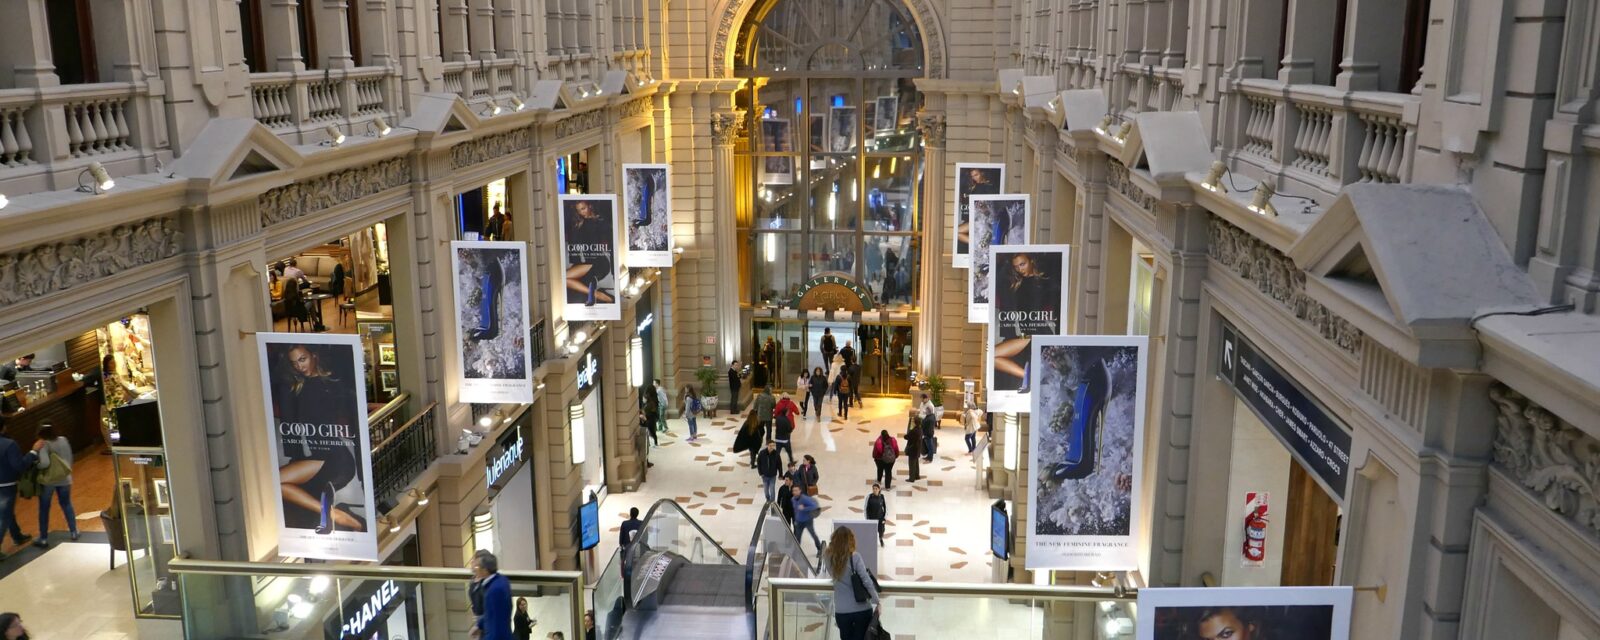 The Best Shopping Galleries in Buenos Aires